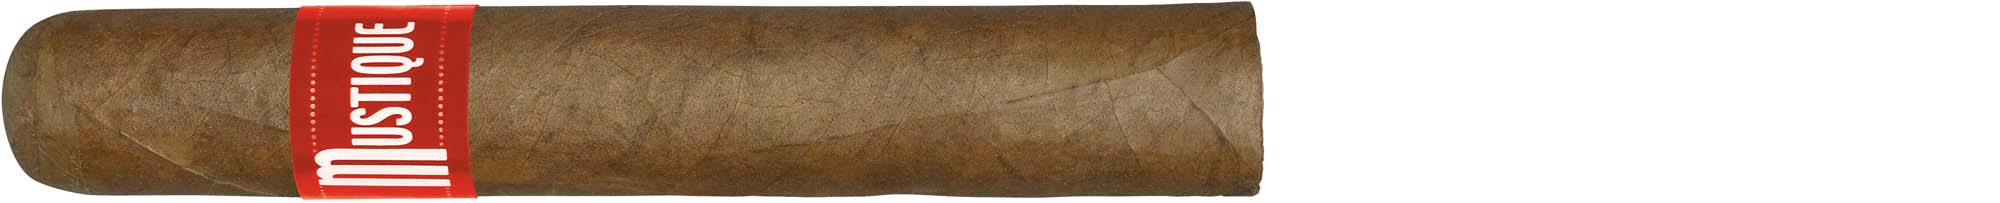 Mustique RED Robusto